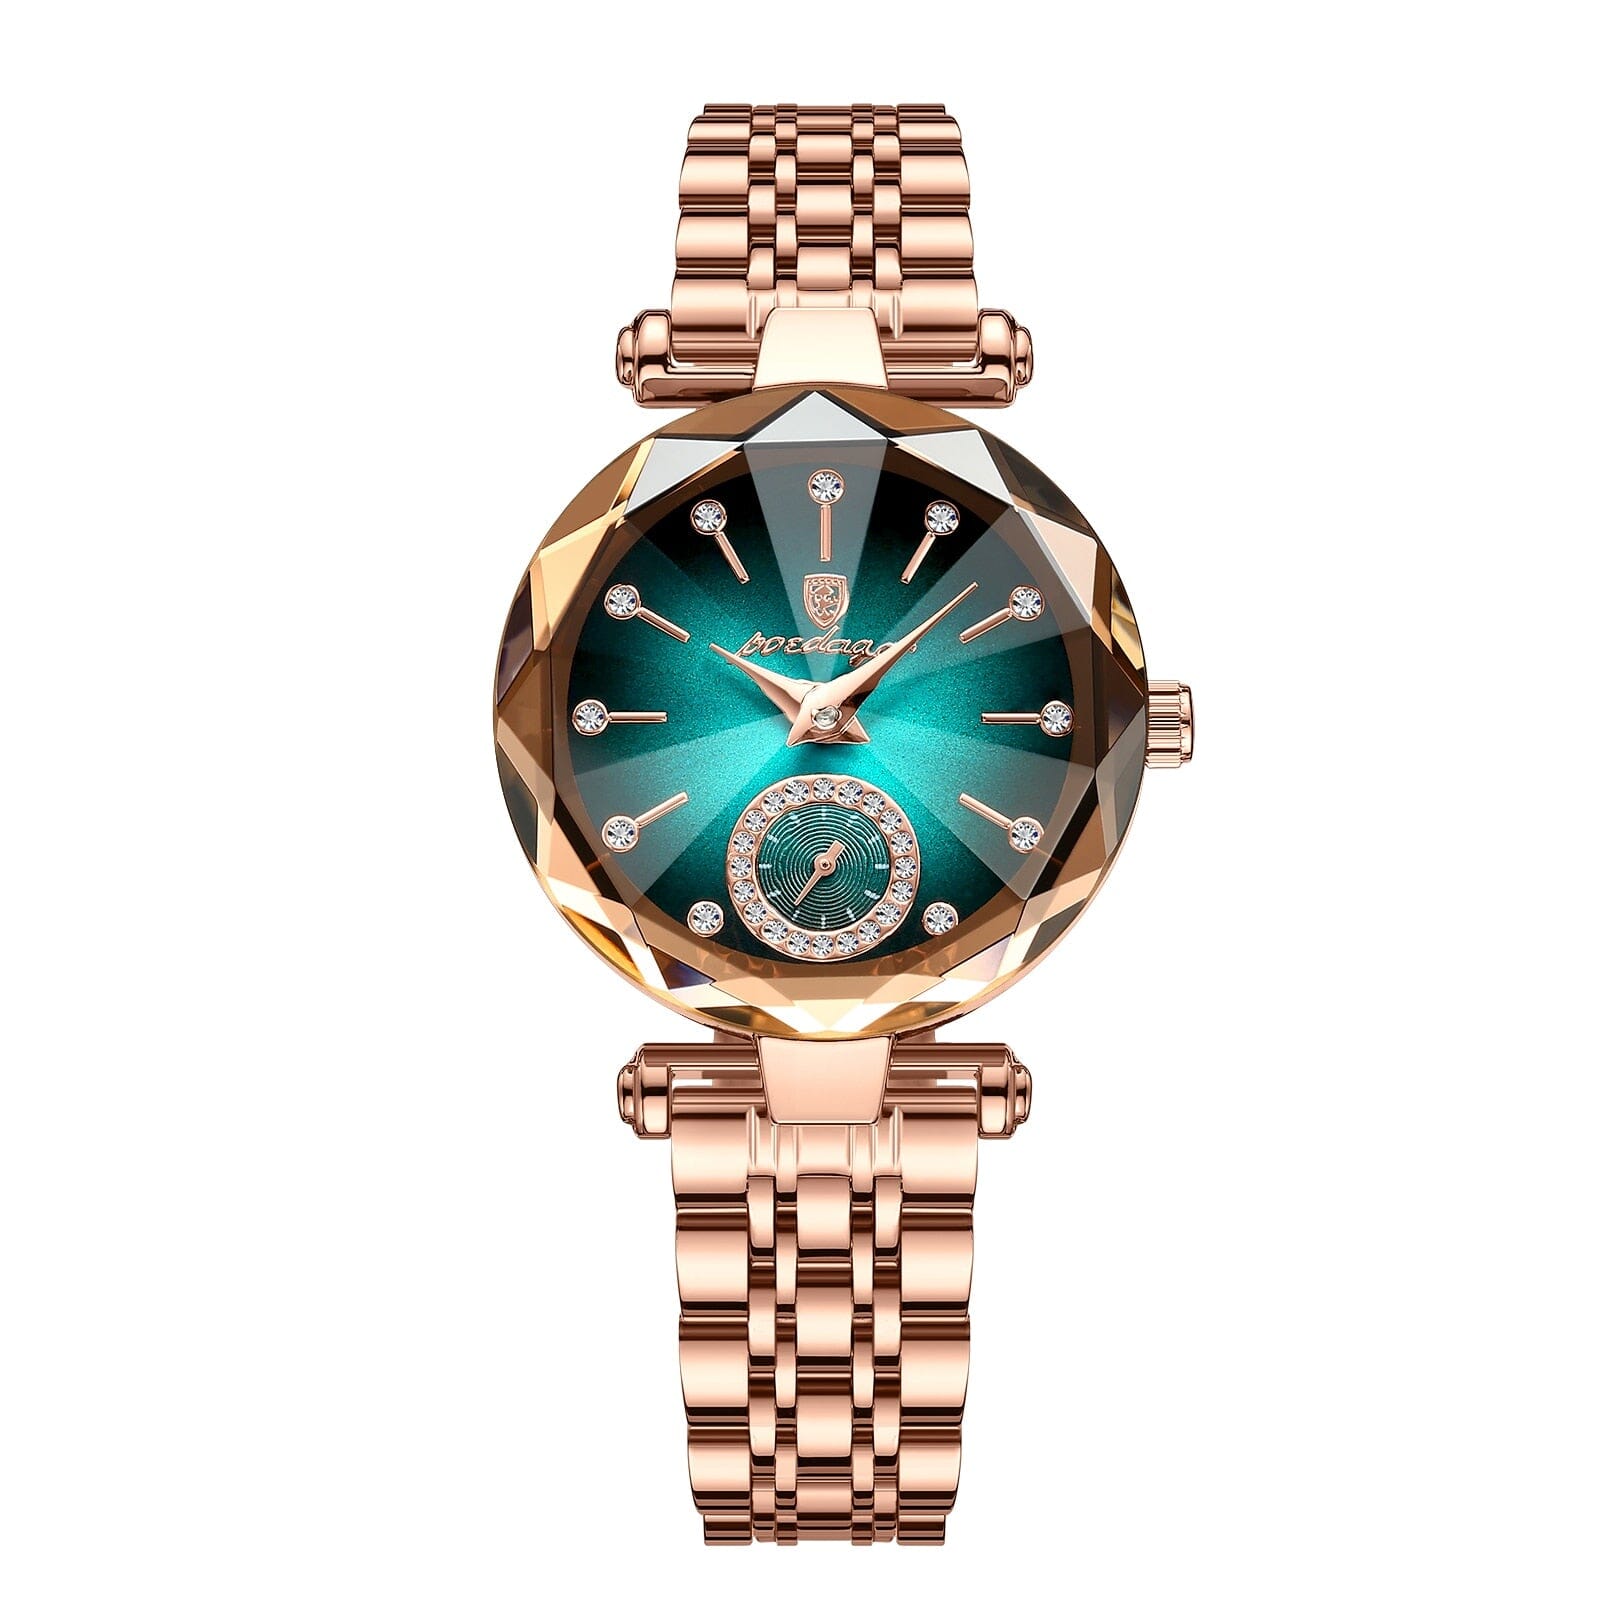 POEDAGAR Luxury Women Watch - Elevate Your Style with Timeless Elegance - Combining Functionality and Fashion Mechanical Watches PikNik Blue Green 